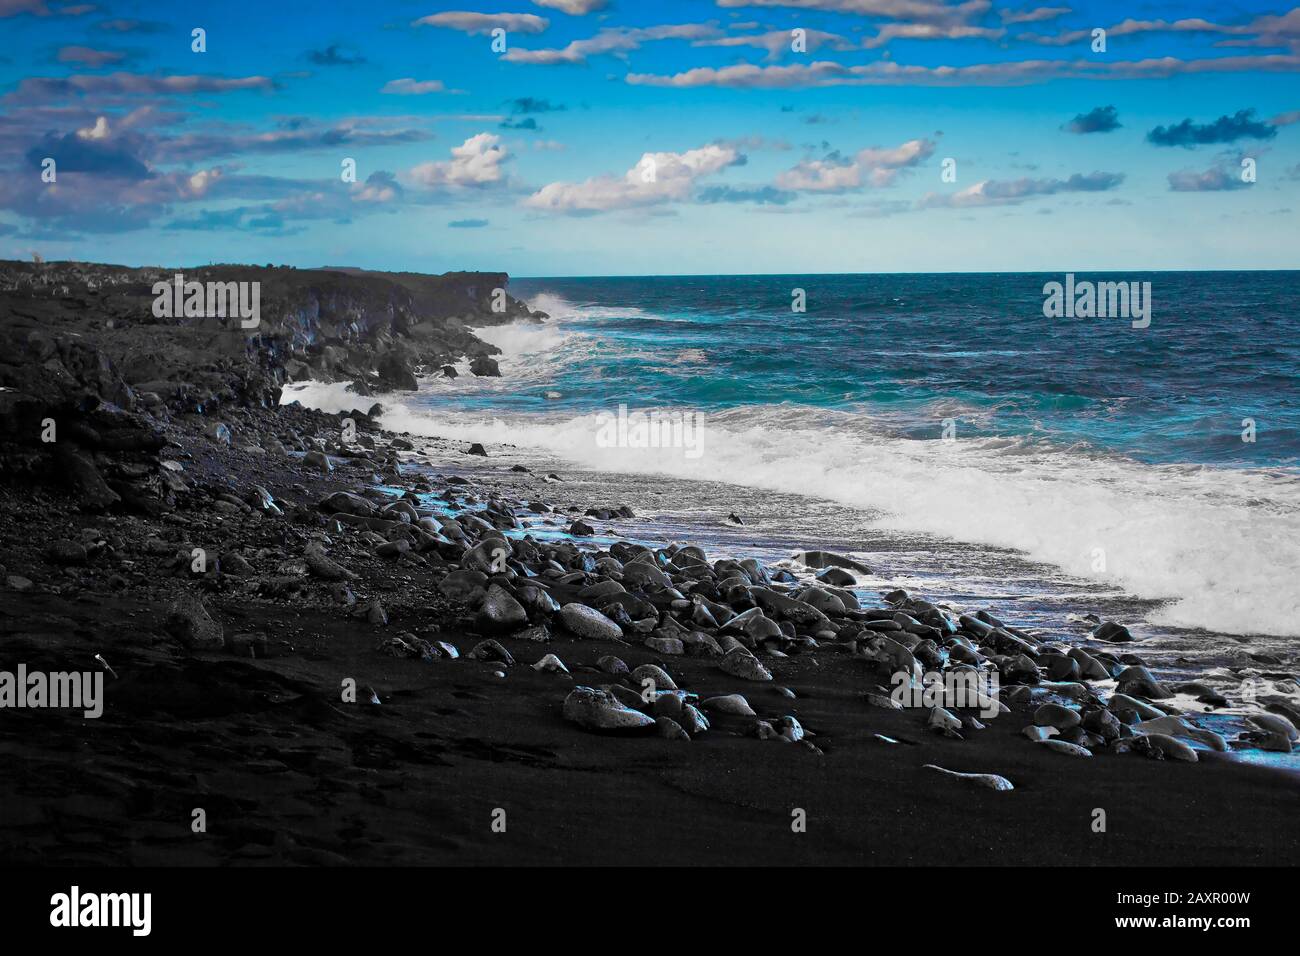 Waves breaking onto a beach of volcanic rock. Stock Photo